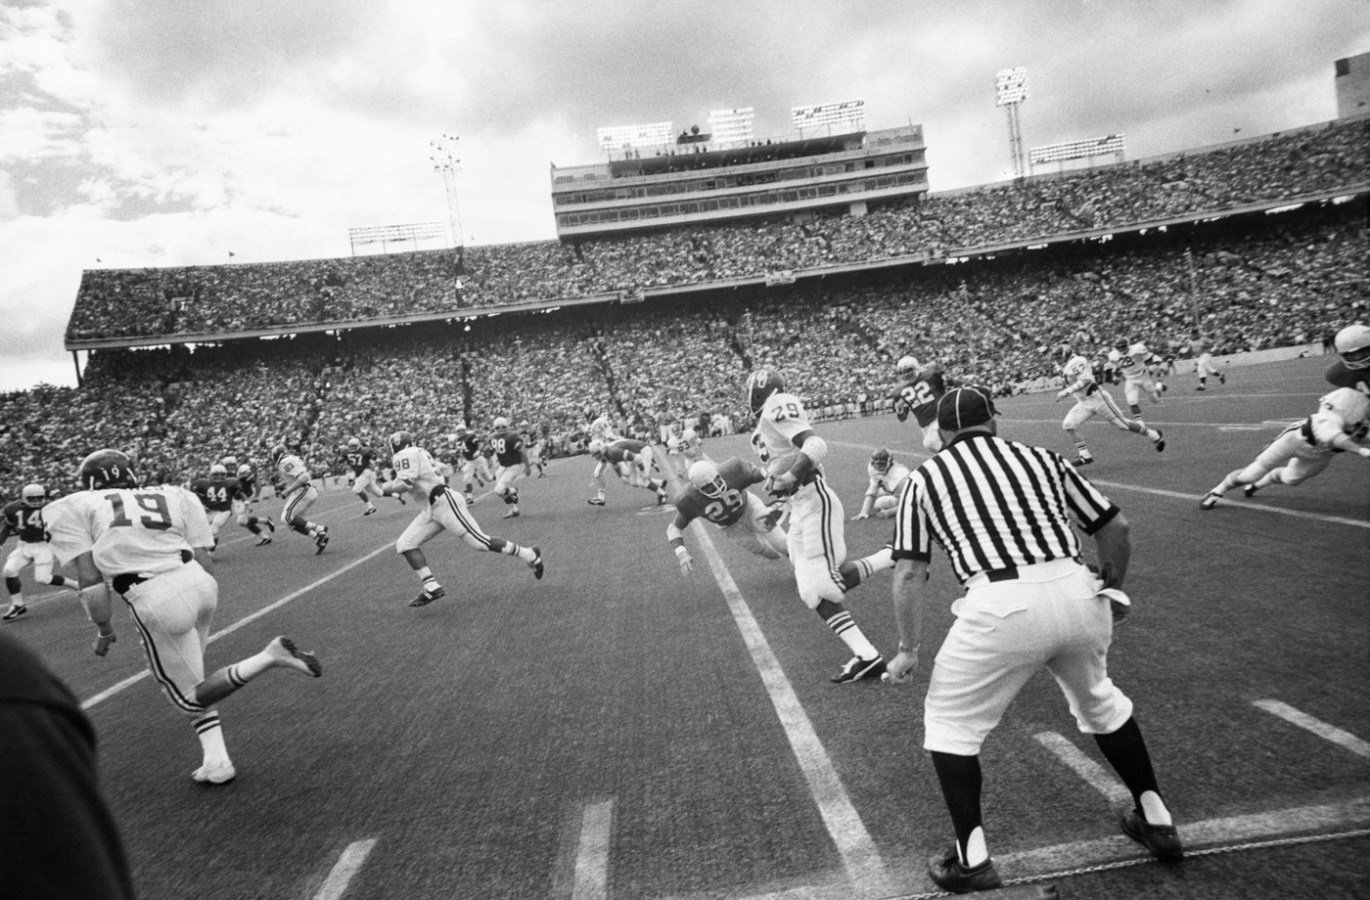 Black and white photograph of a football game in a large populated stadium